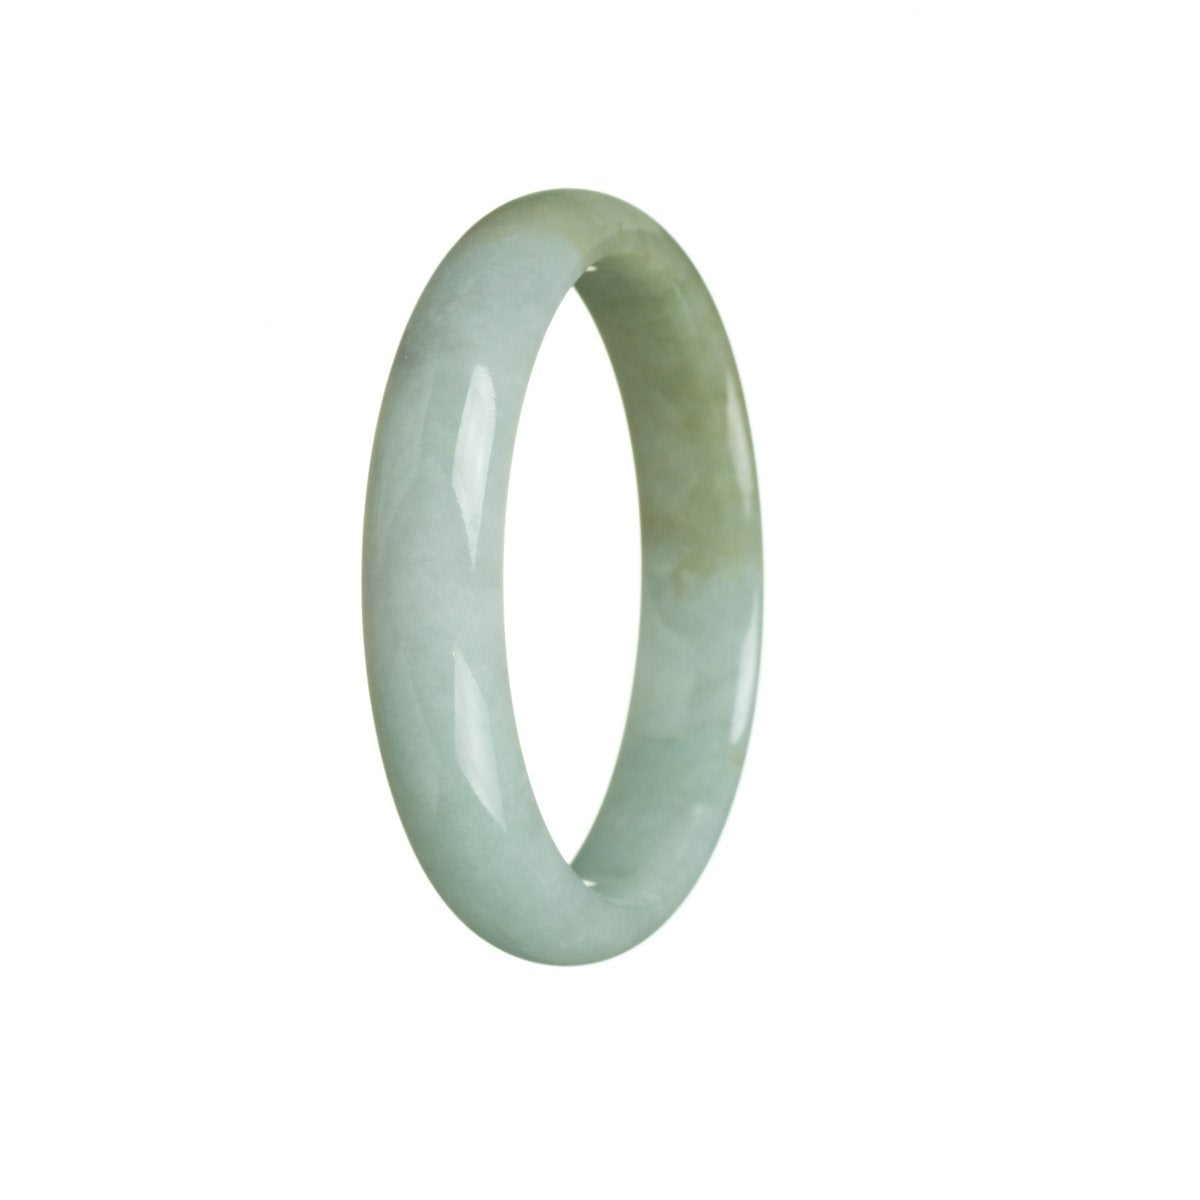 A half moon-shaped bangle bracelet made of certified untreated light green with olive green Burma Jade. The bracelet measures 56mm in size. Created by MAYS GEMS.